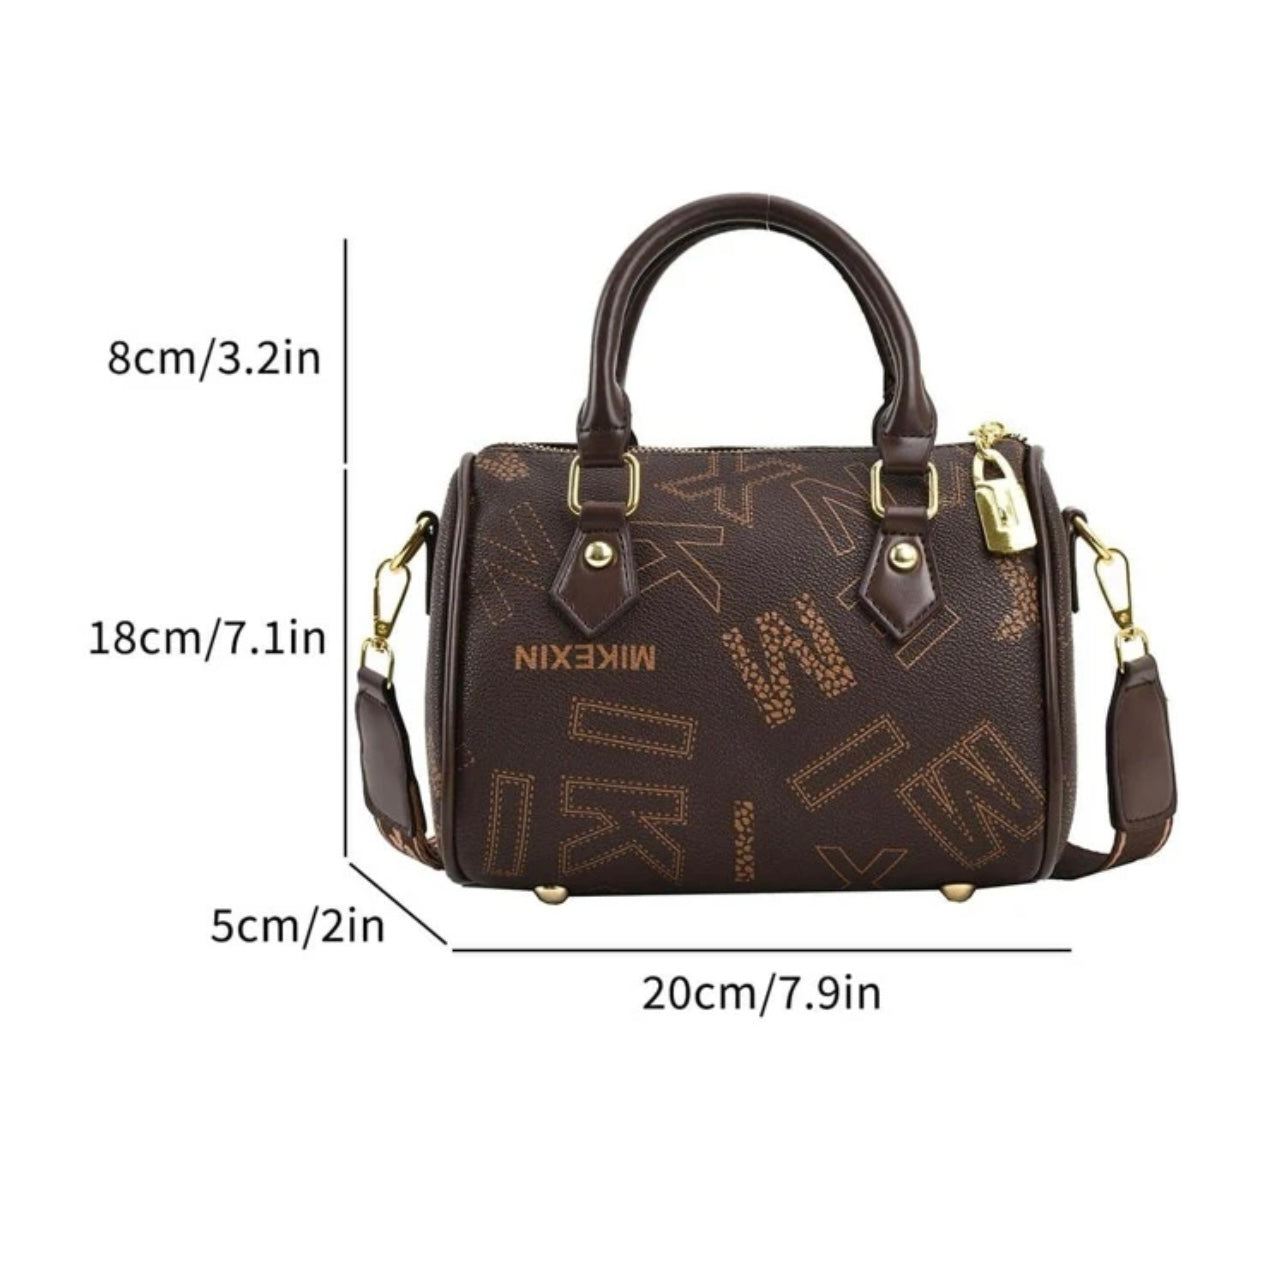 Designer leather vintage cross body adjustable coffee brown handbag with zipper gold accents and letter pattern style considered a “Boston bag” comes with a long adjustable removable matching straps and handles for adjustable convenience. This bag is only available at LadiesNGentz.com and also At  Facetreasures Boutique at facetreasures.com debut for the first time on LadiesNgentz on Black Friday November 2023